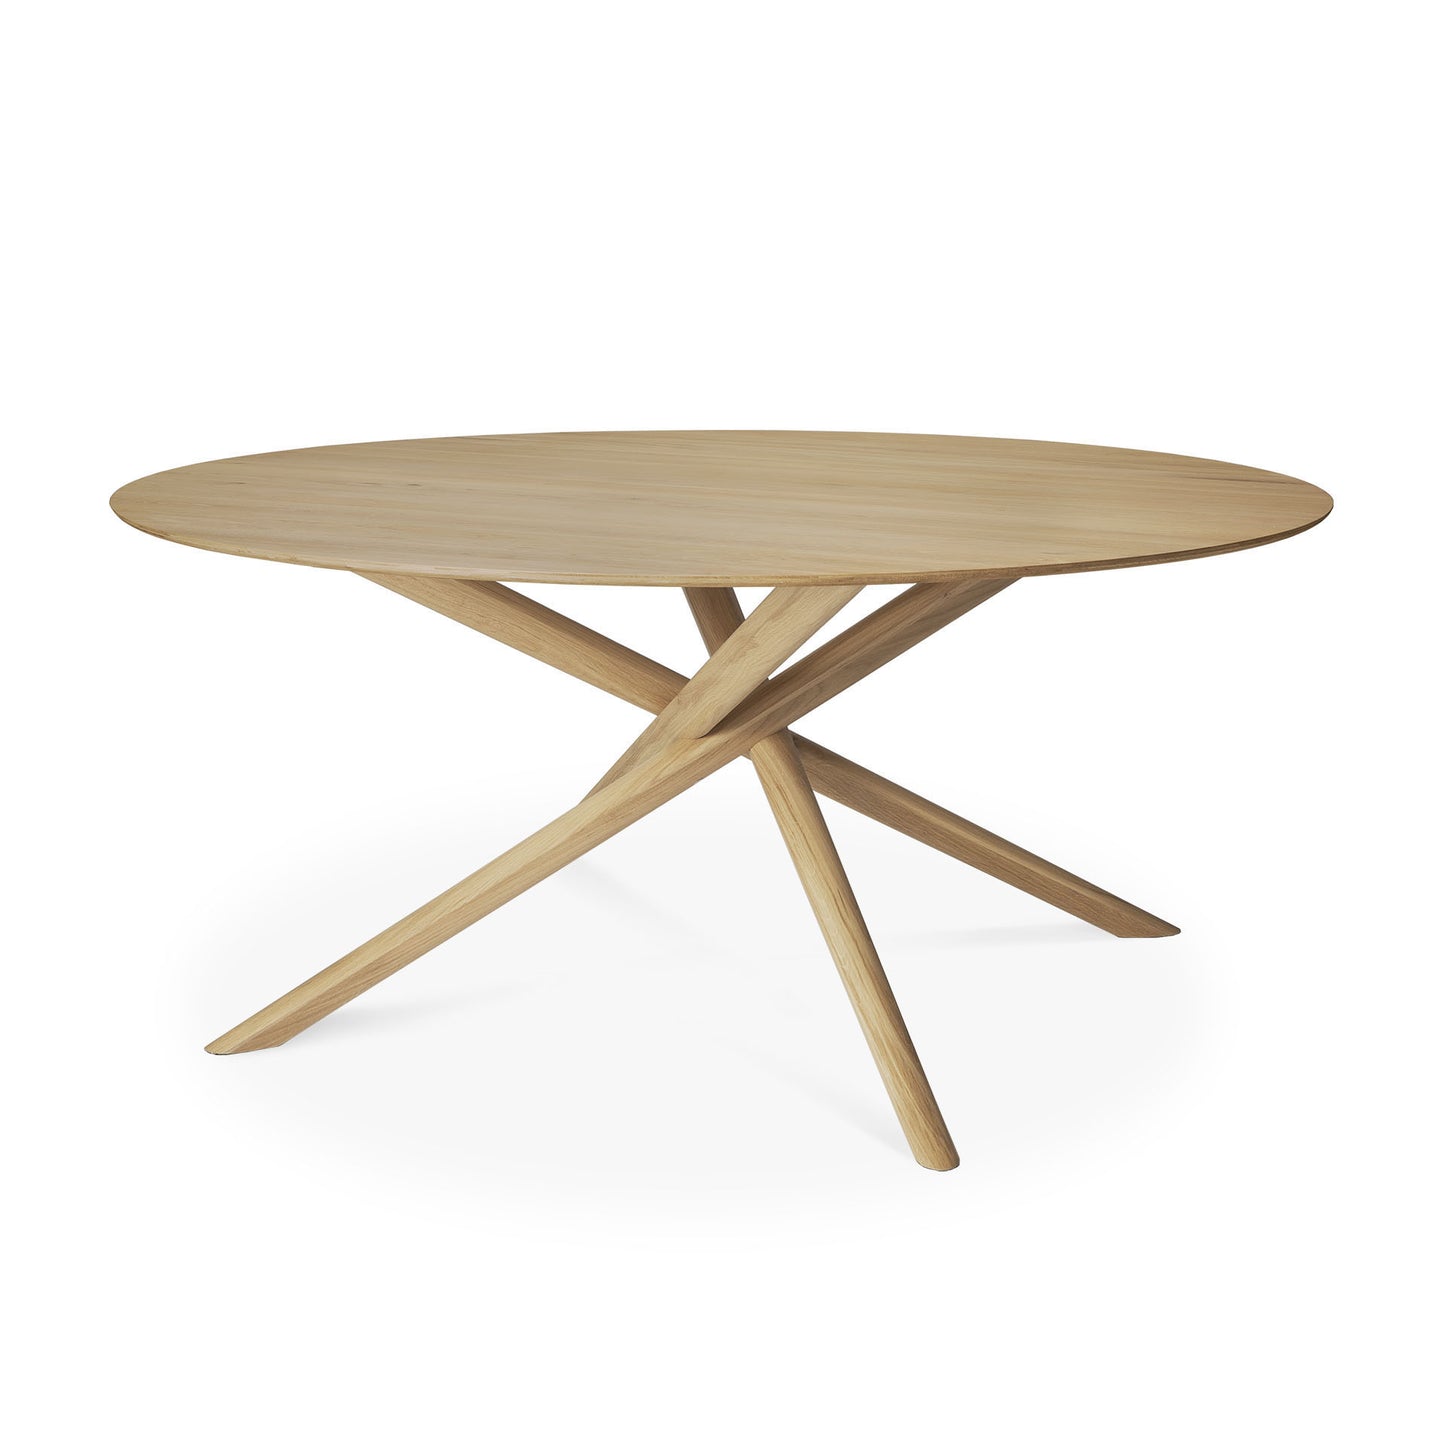 Ethnicraft Oak Mikado Oval Dining Table available from Make Your House A Home, Bendigo, Victoria, Australia